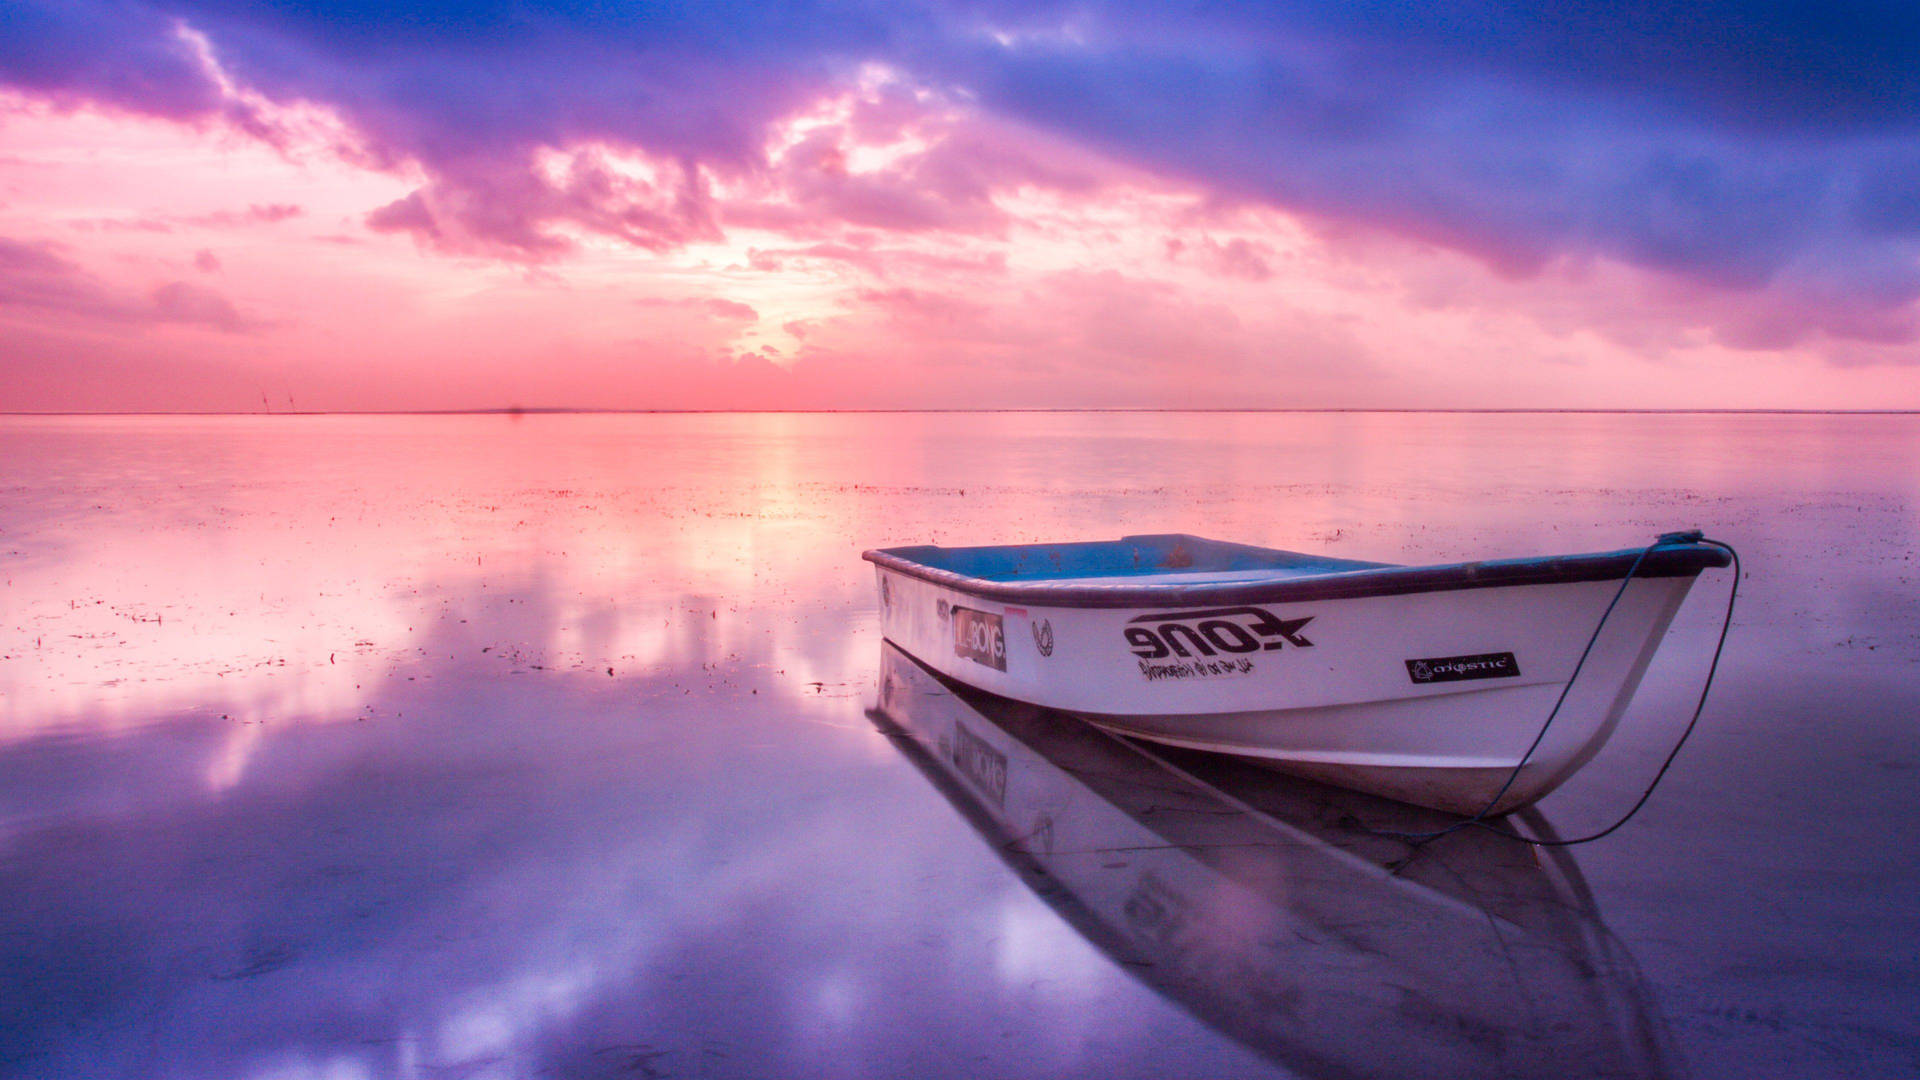 Boat Reflection In Sea Water Background